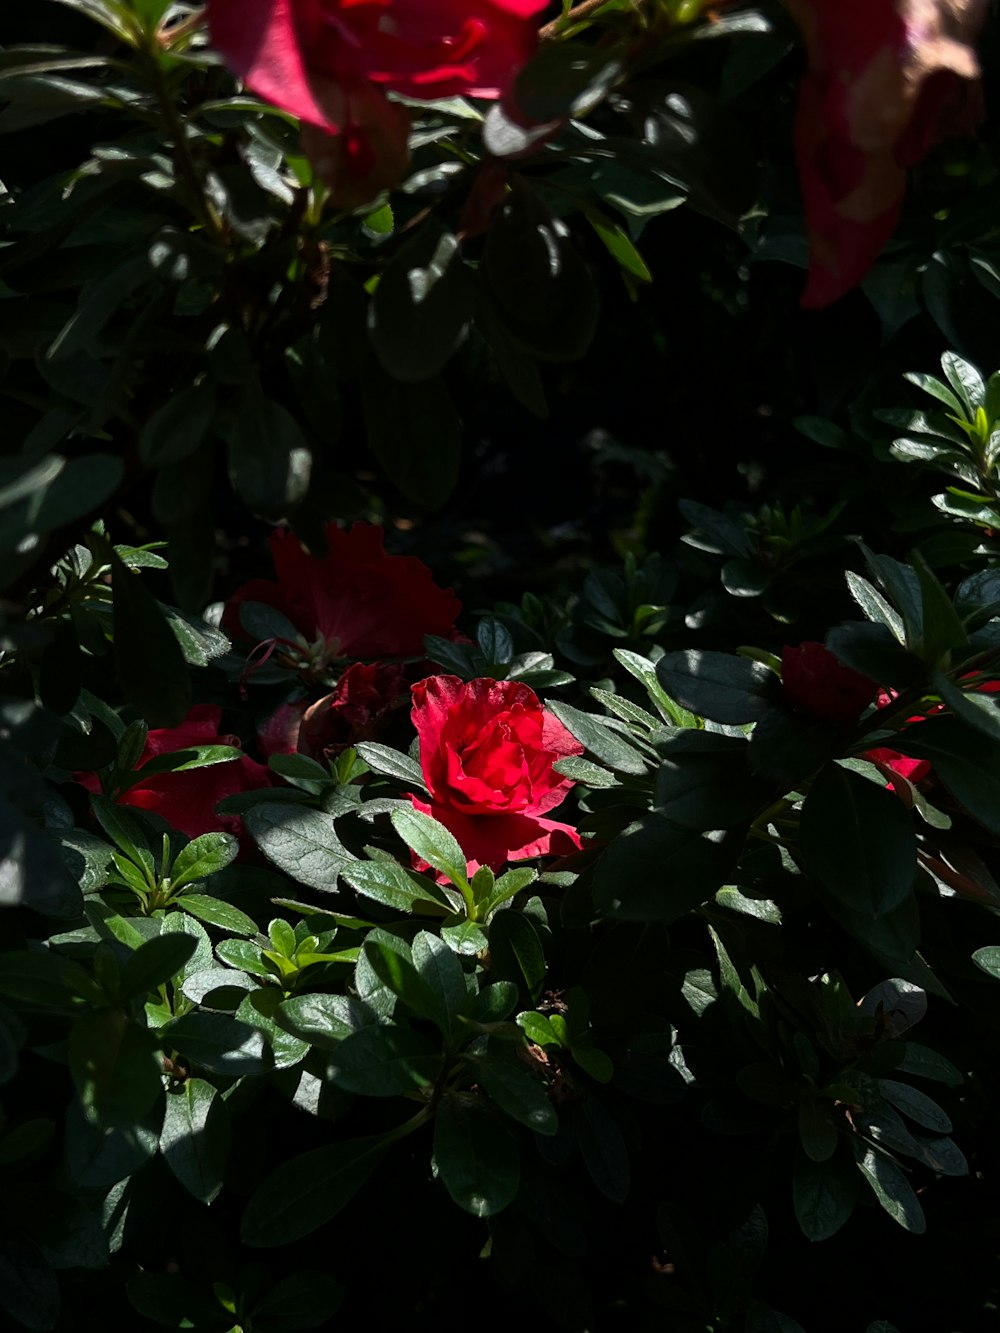 a close up of a red rose surrounded by green leaves